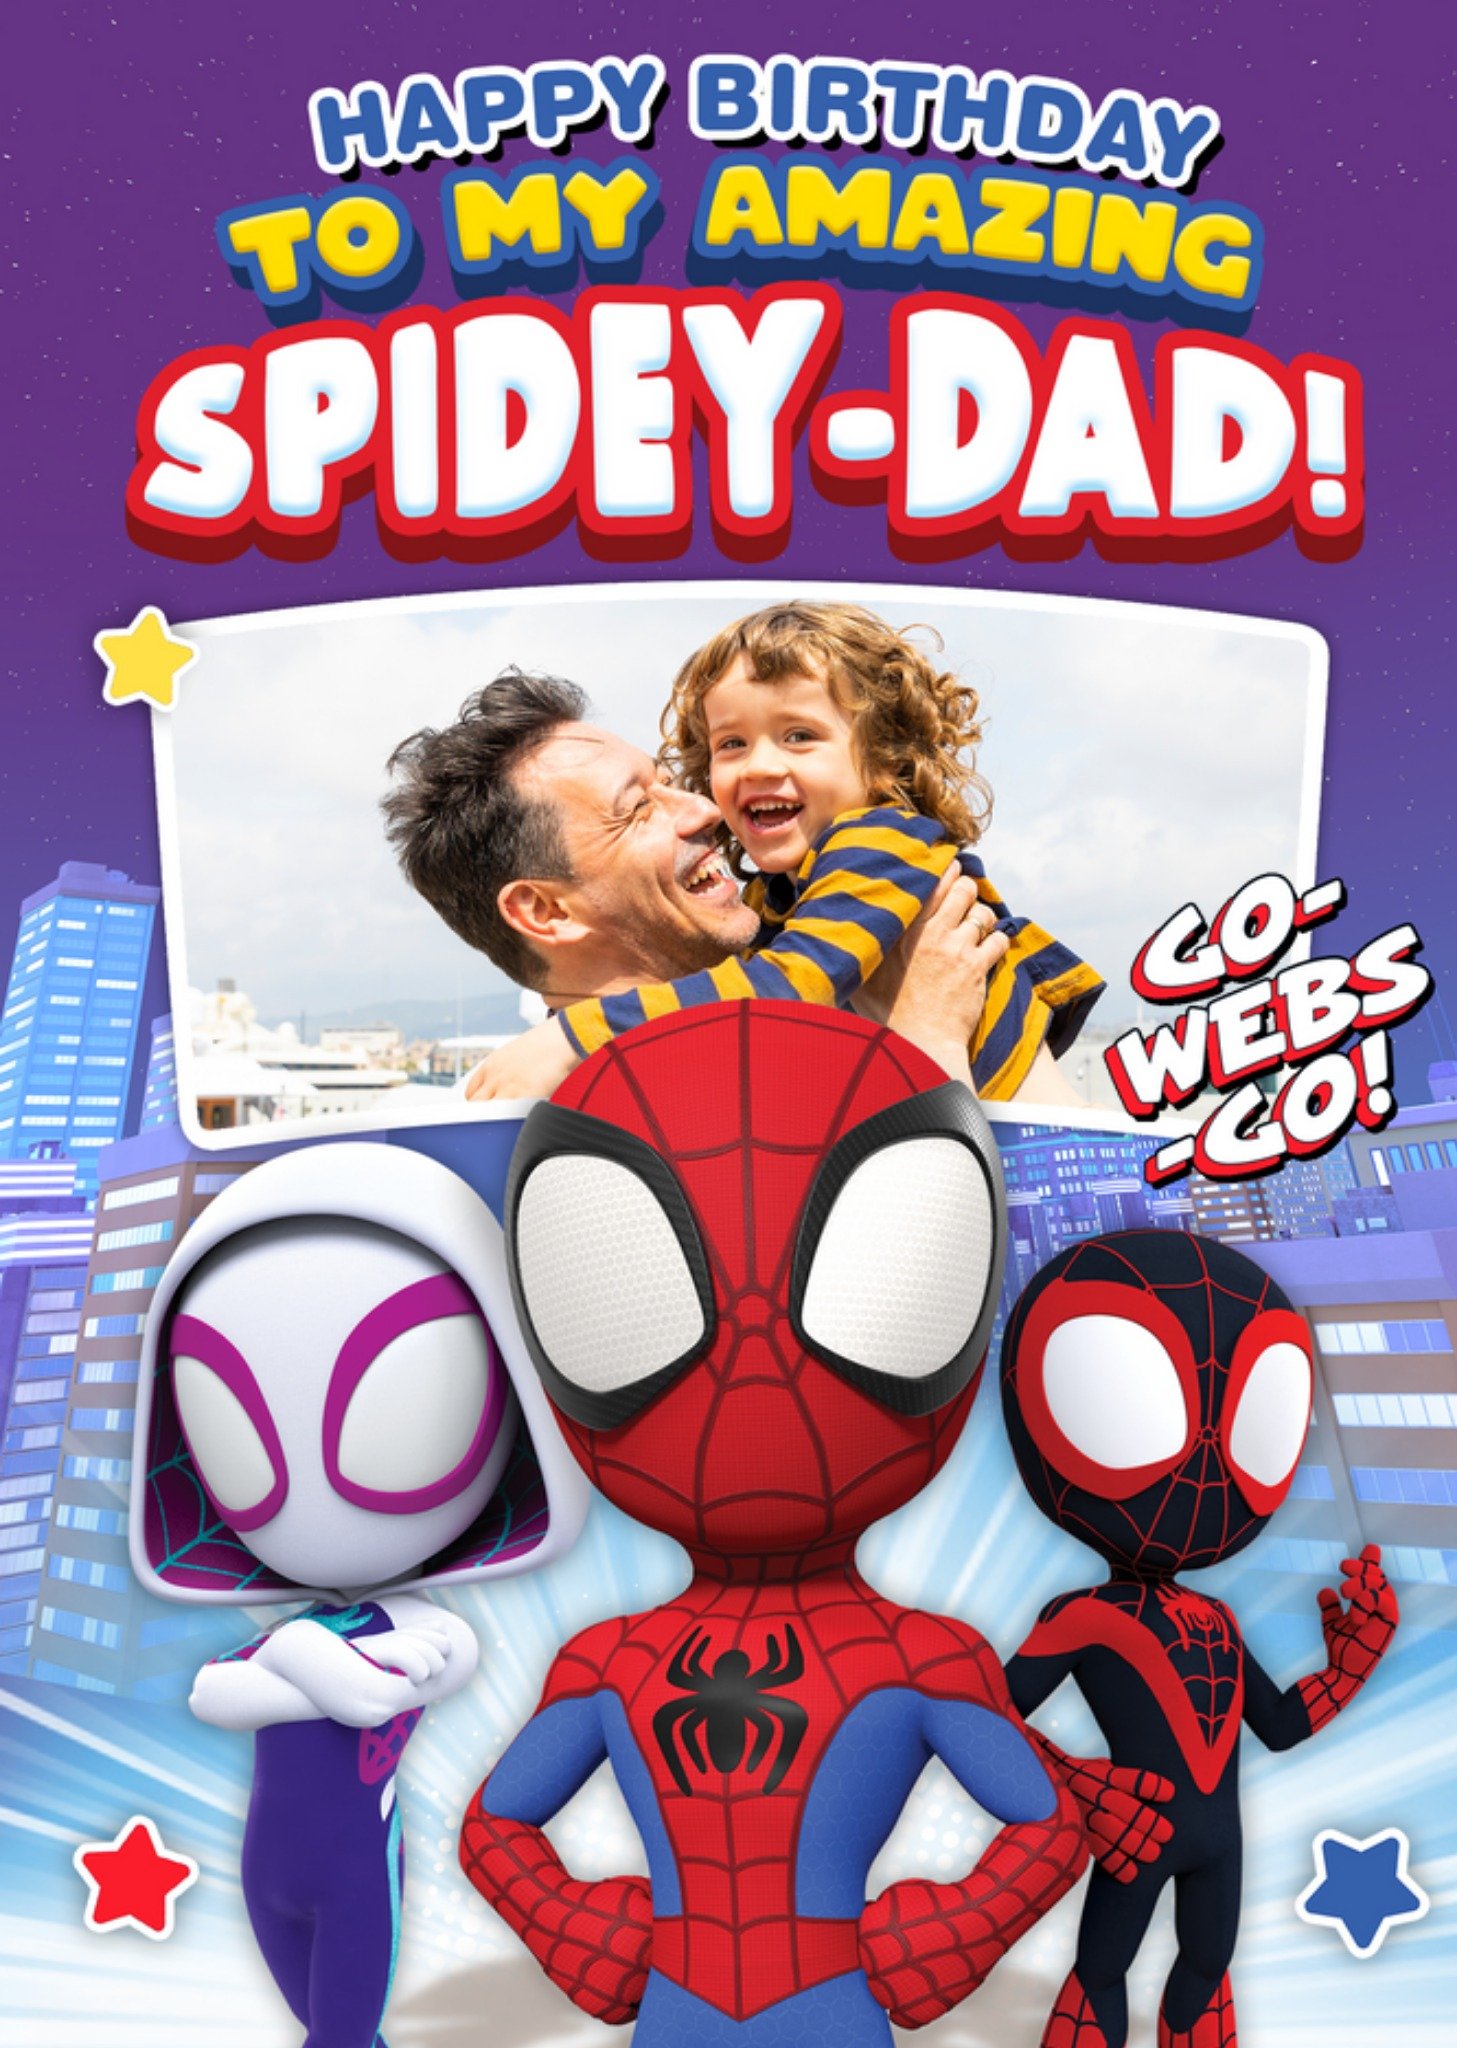 Marvel Spidey And His Amazing Friends Photo Upload Spidey-Dad Birthday Card, Large